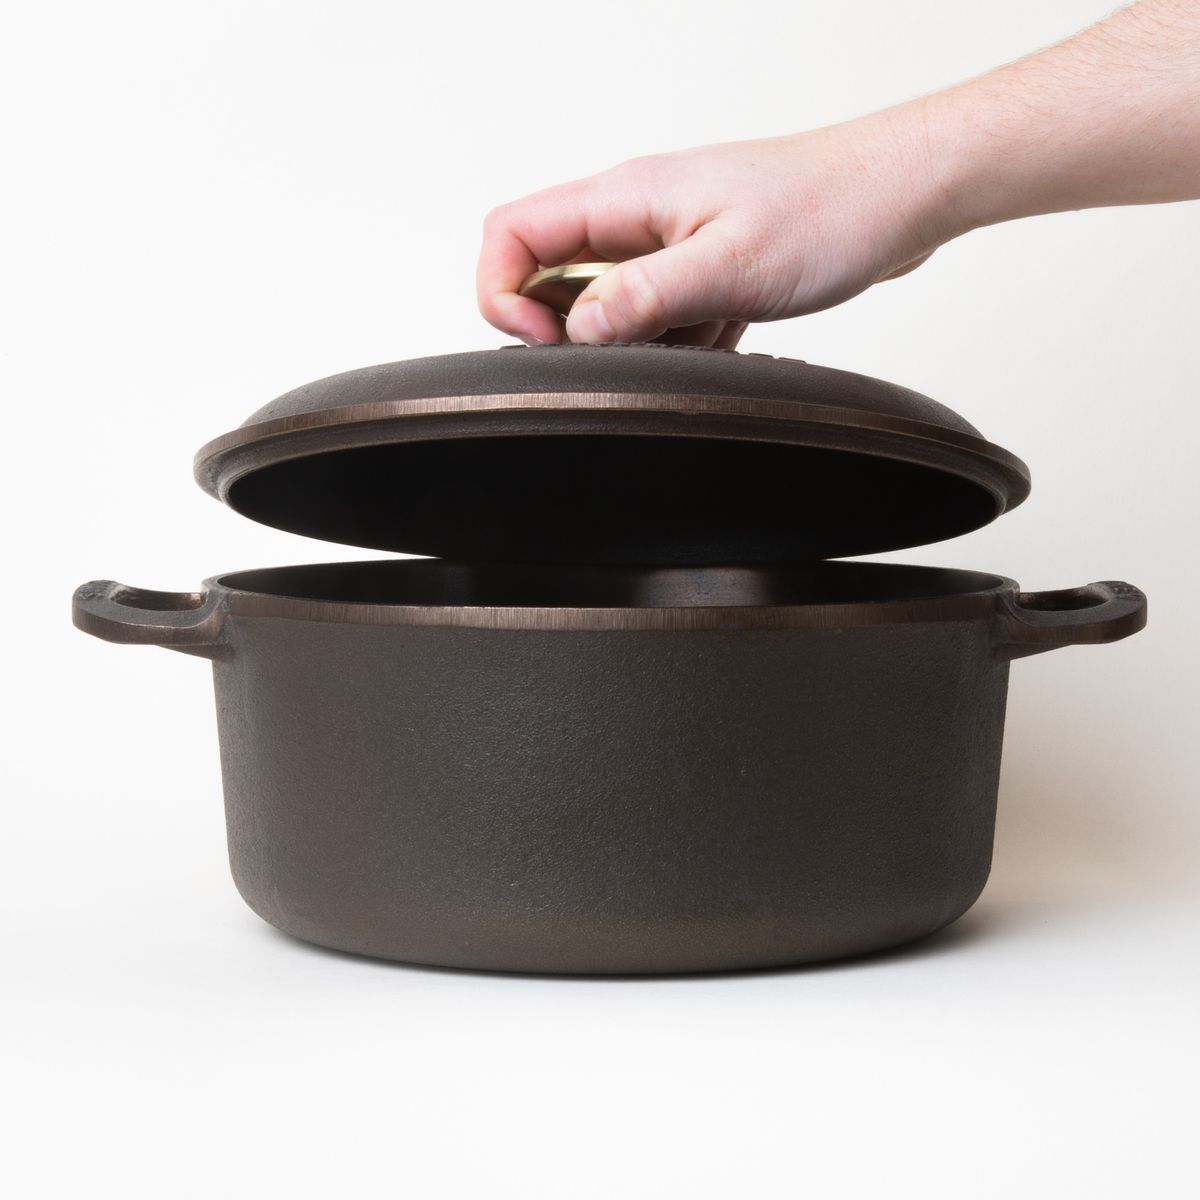 Hand holding the cast iron lid over a cast iron dutch oven with a handle on each side